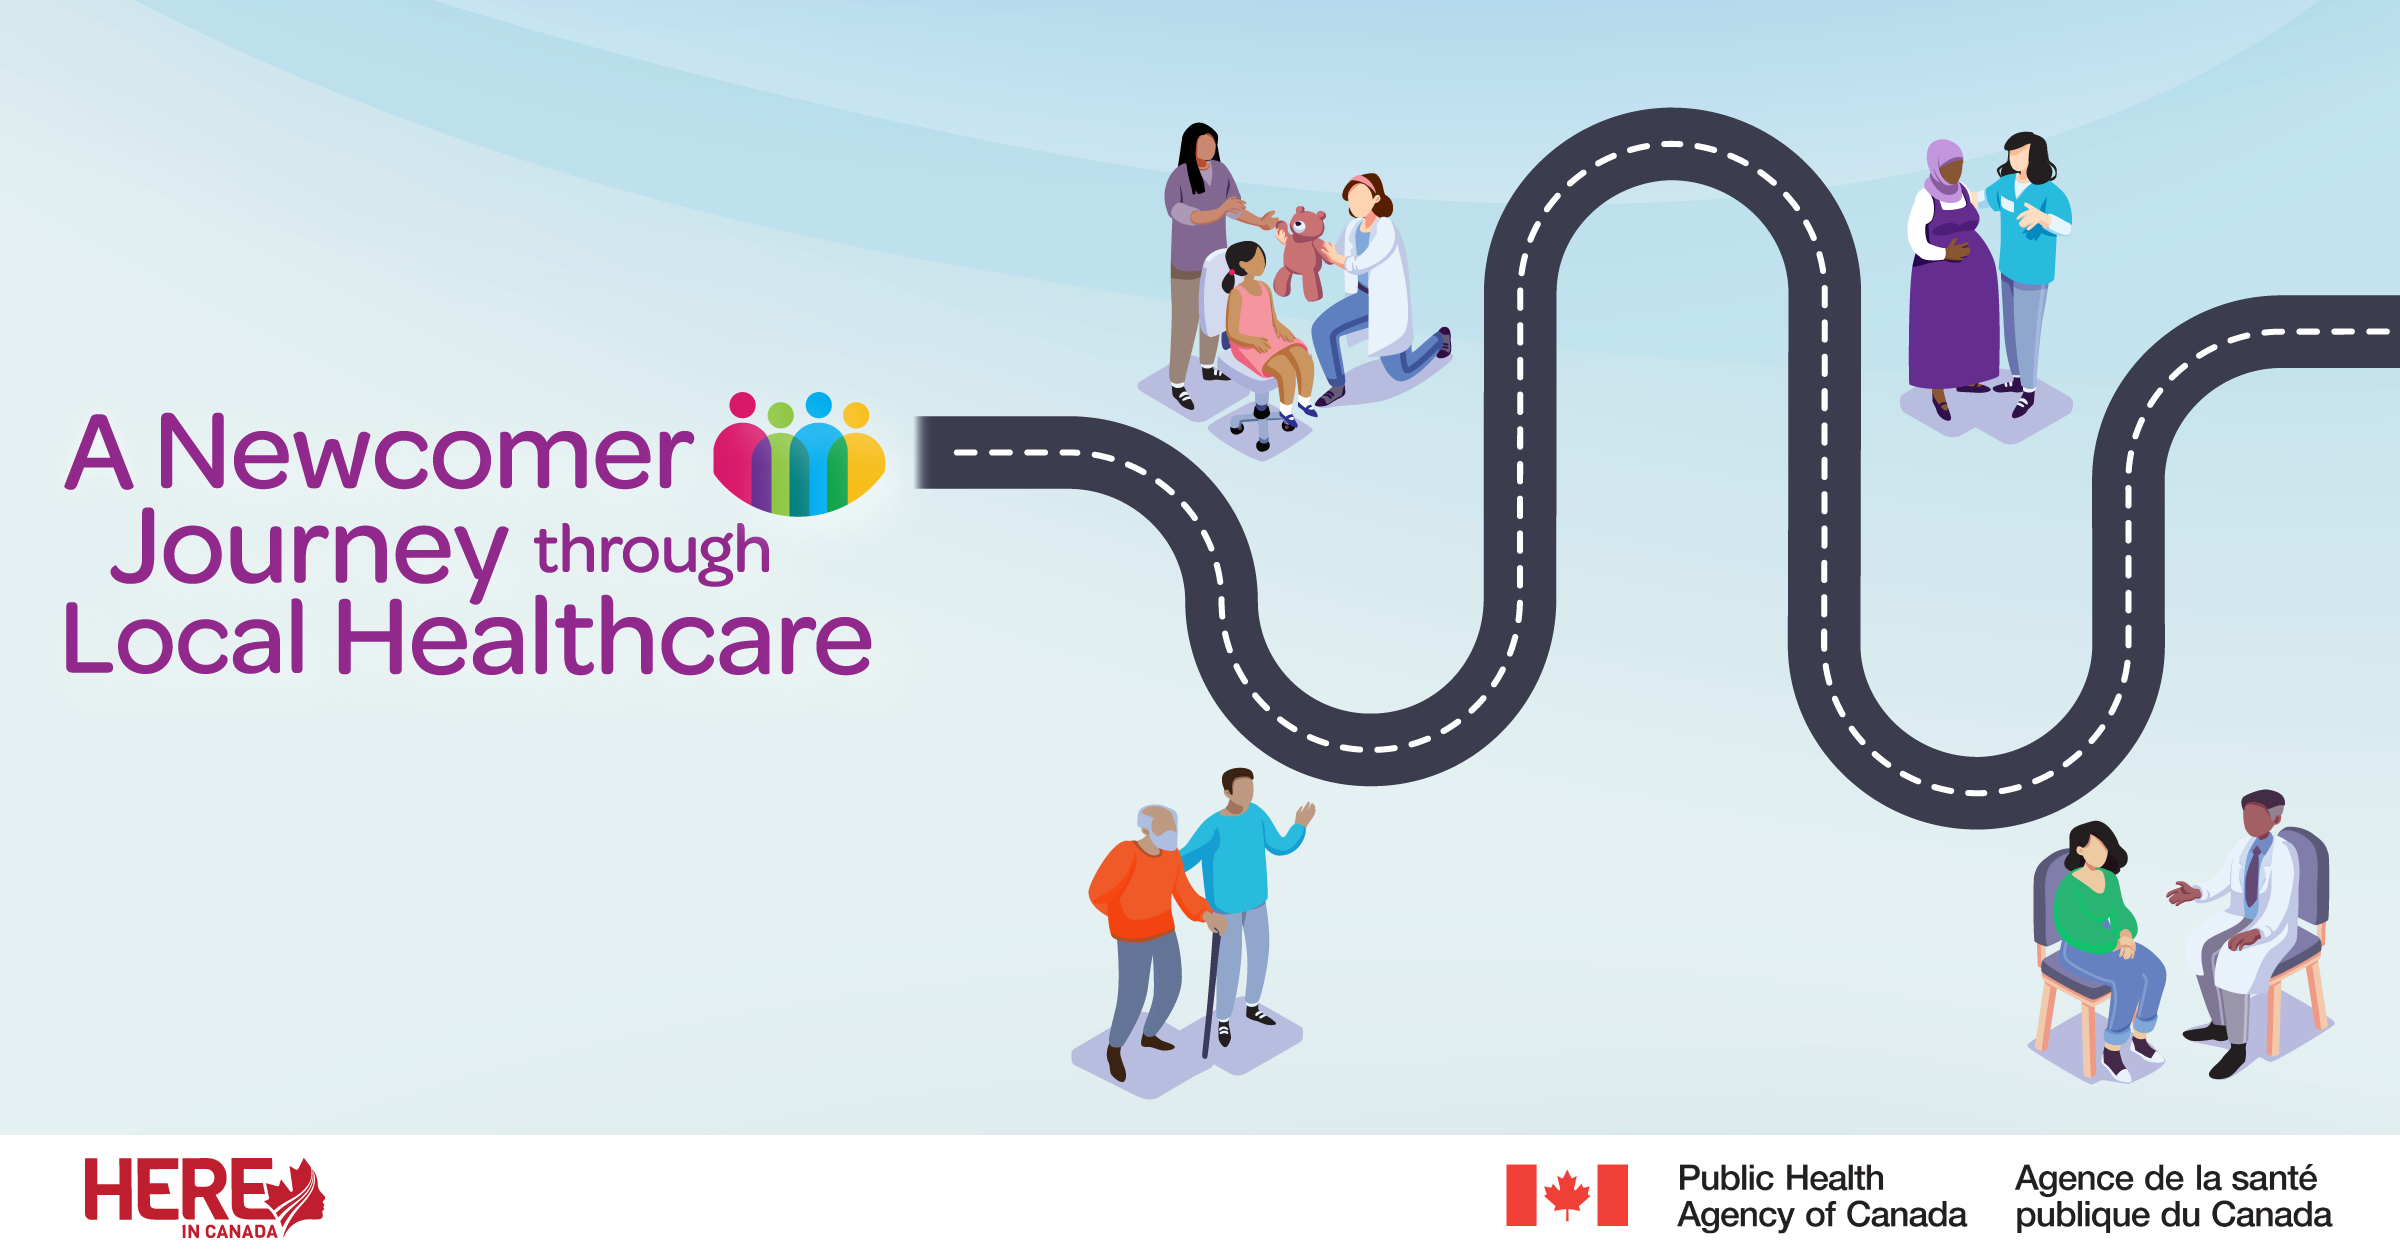 Newcomer Journey through Local Healthcare visual